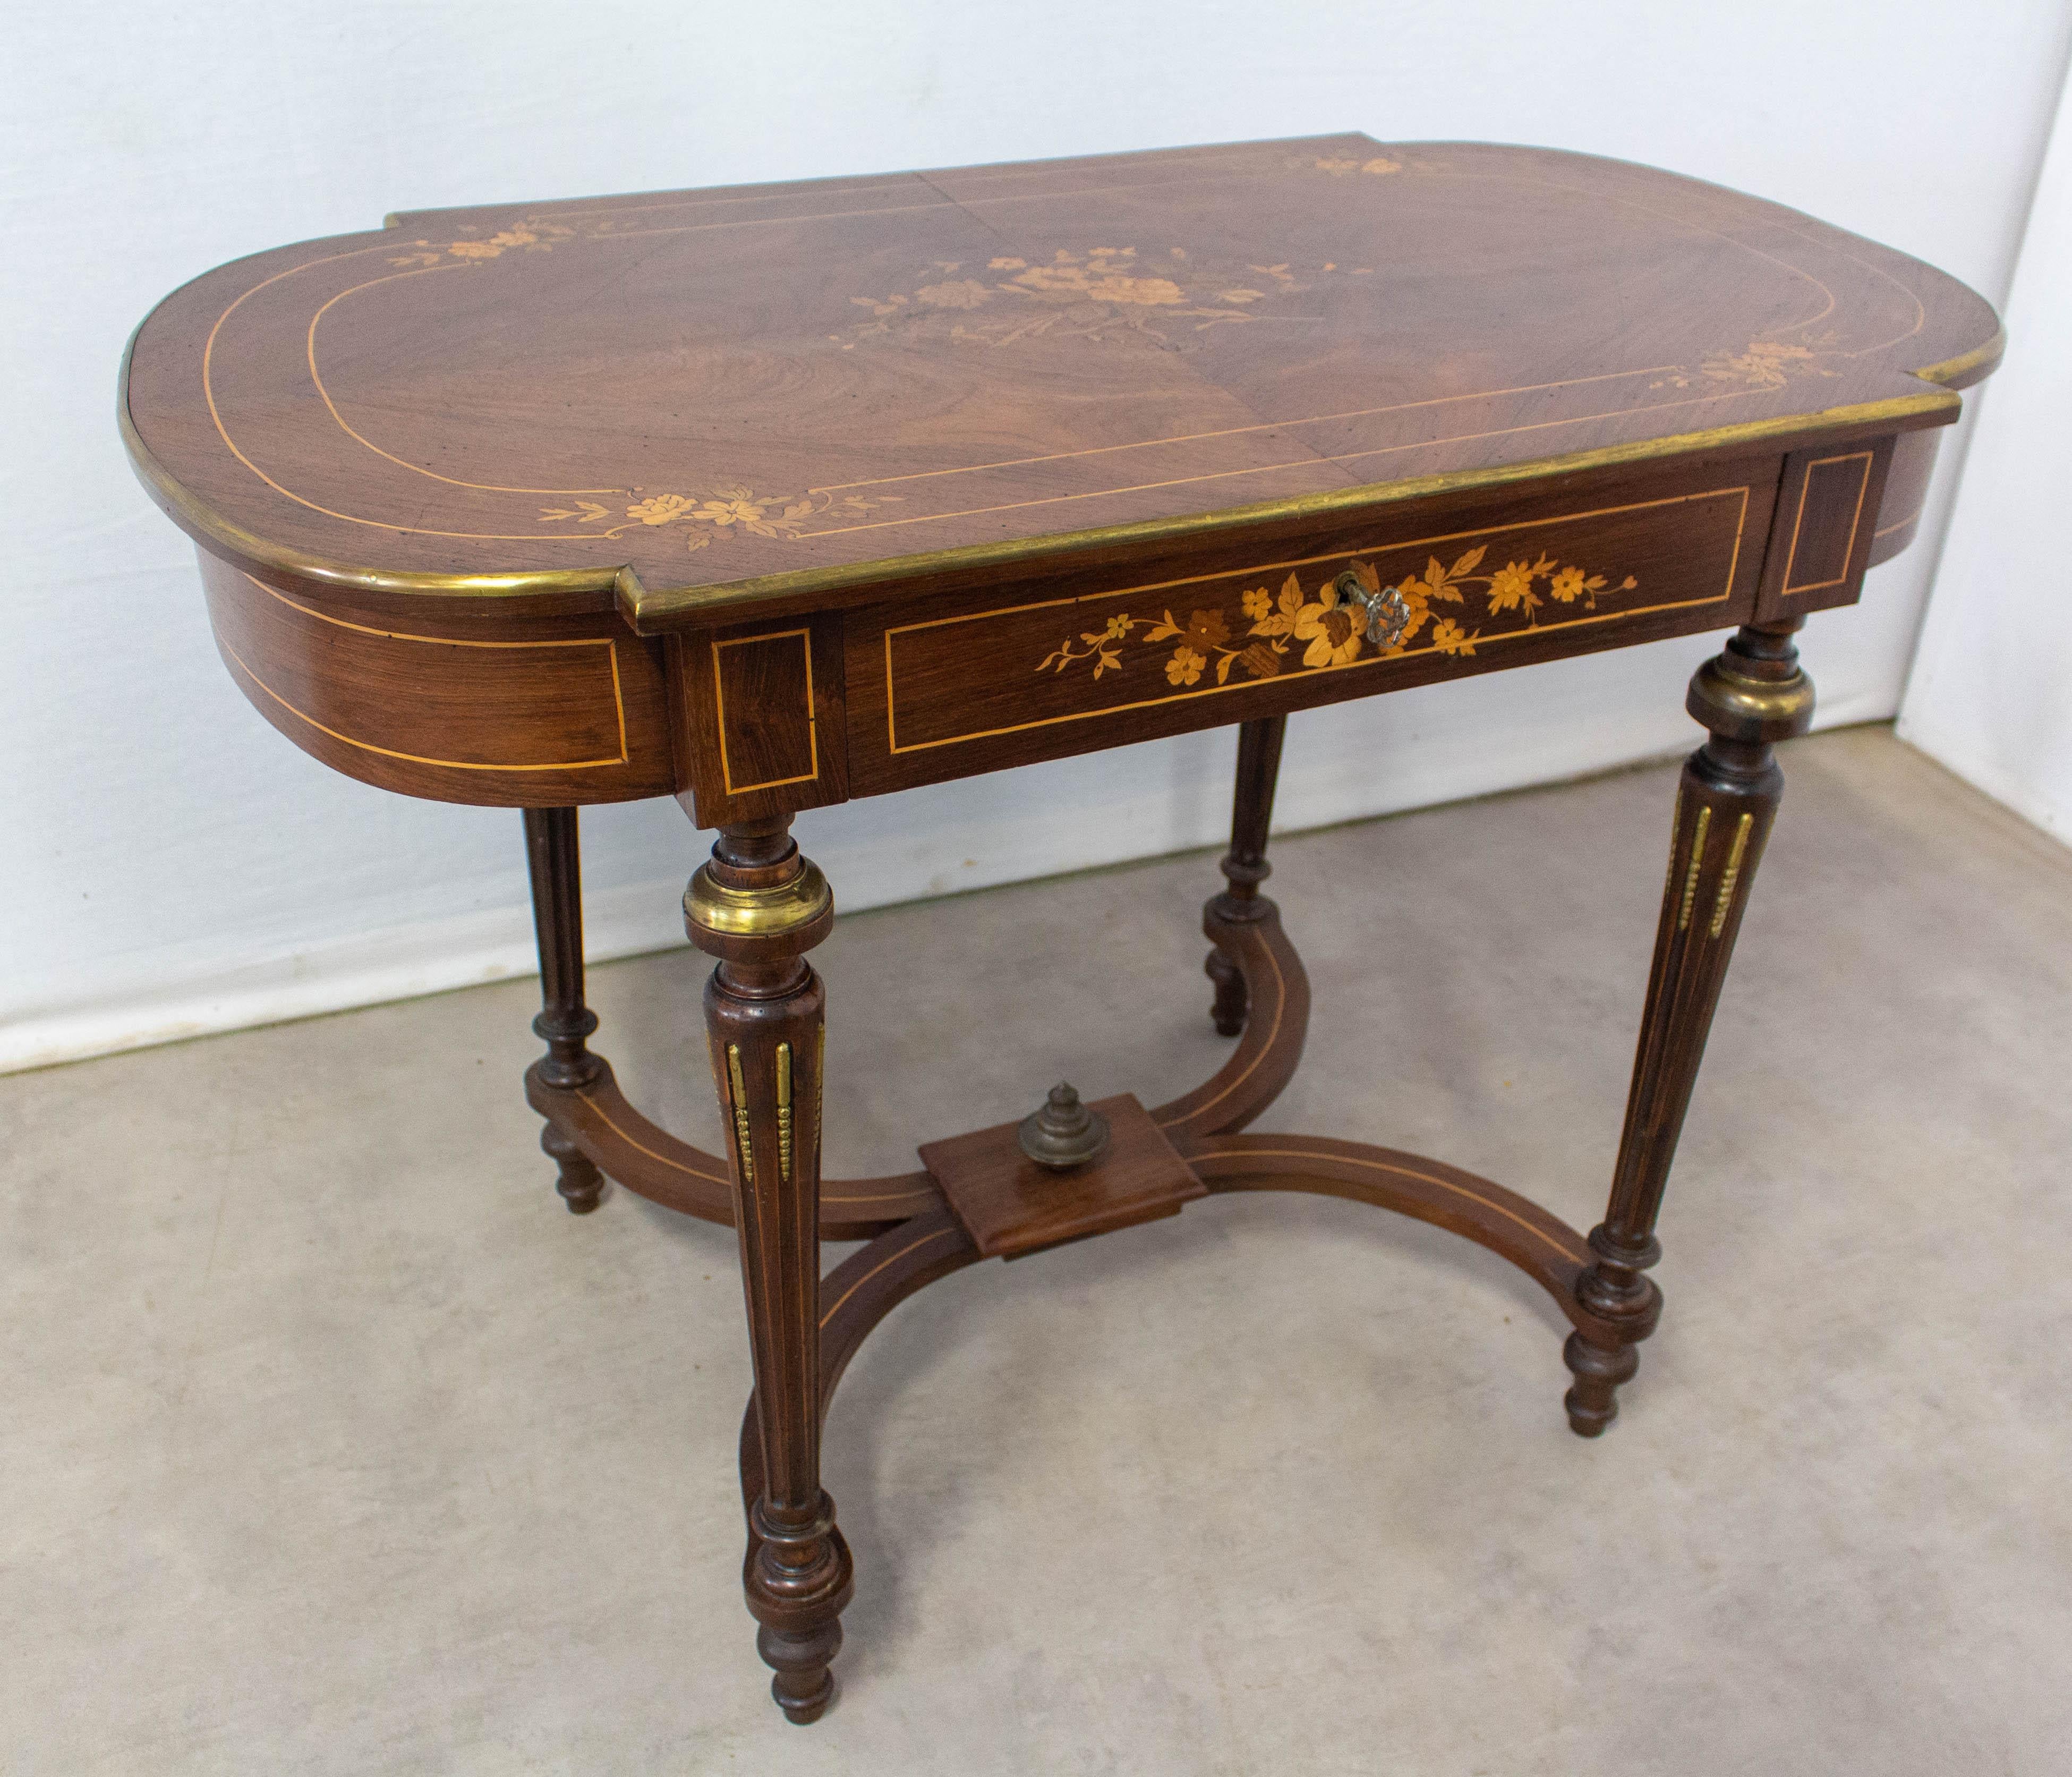 Wood French Writing Table Louis XVI Style Floral Inlays, 19th Century